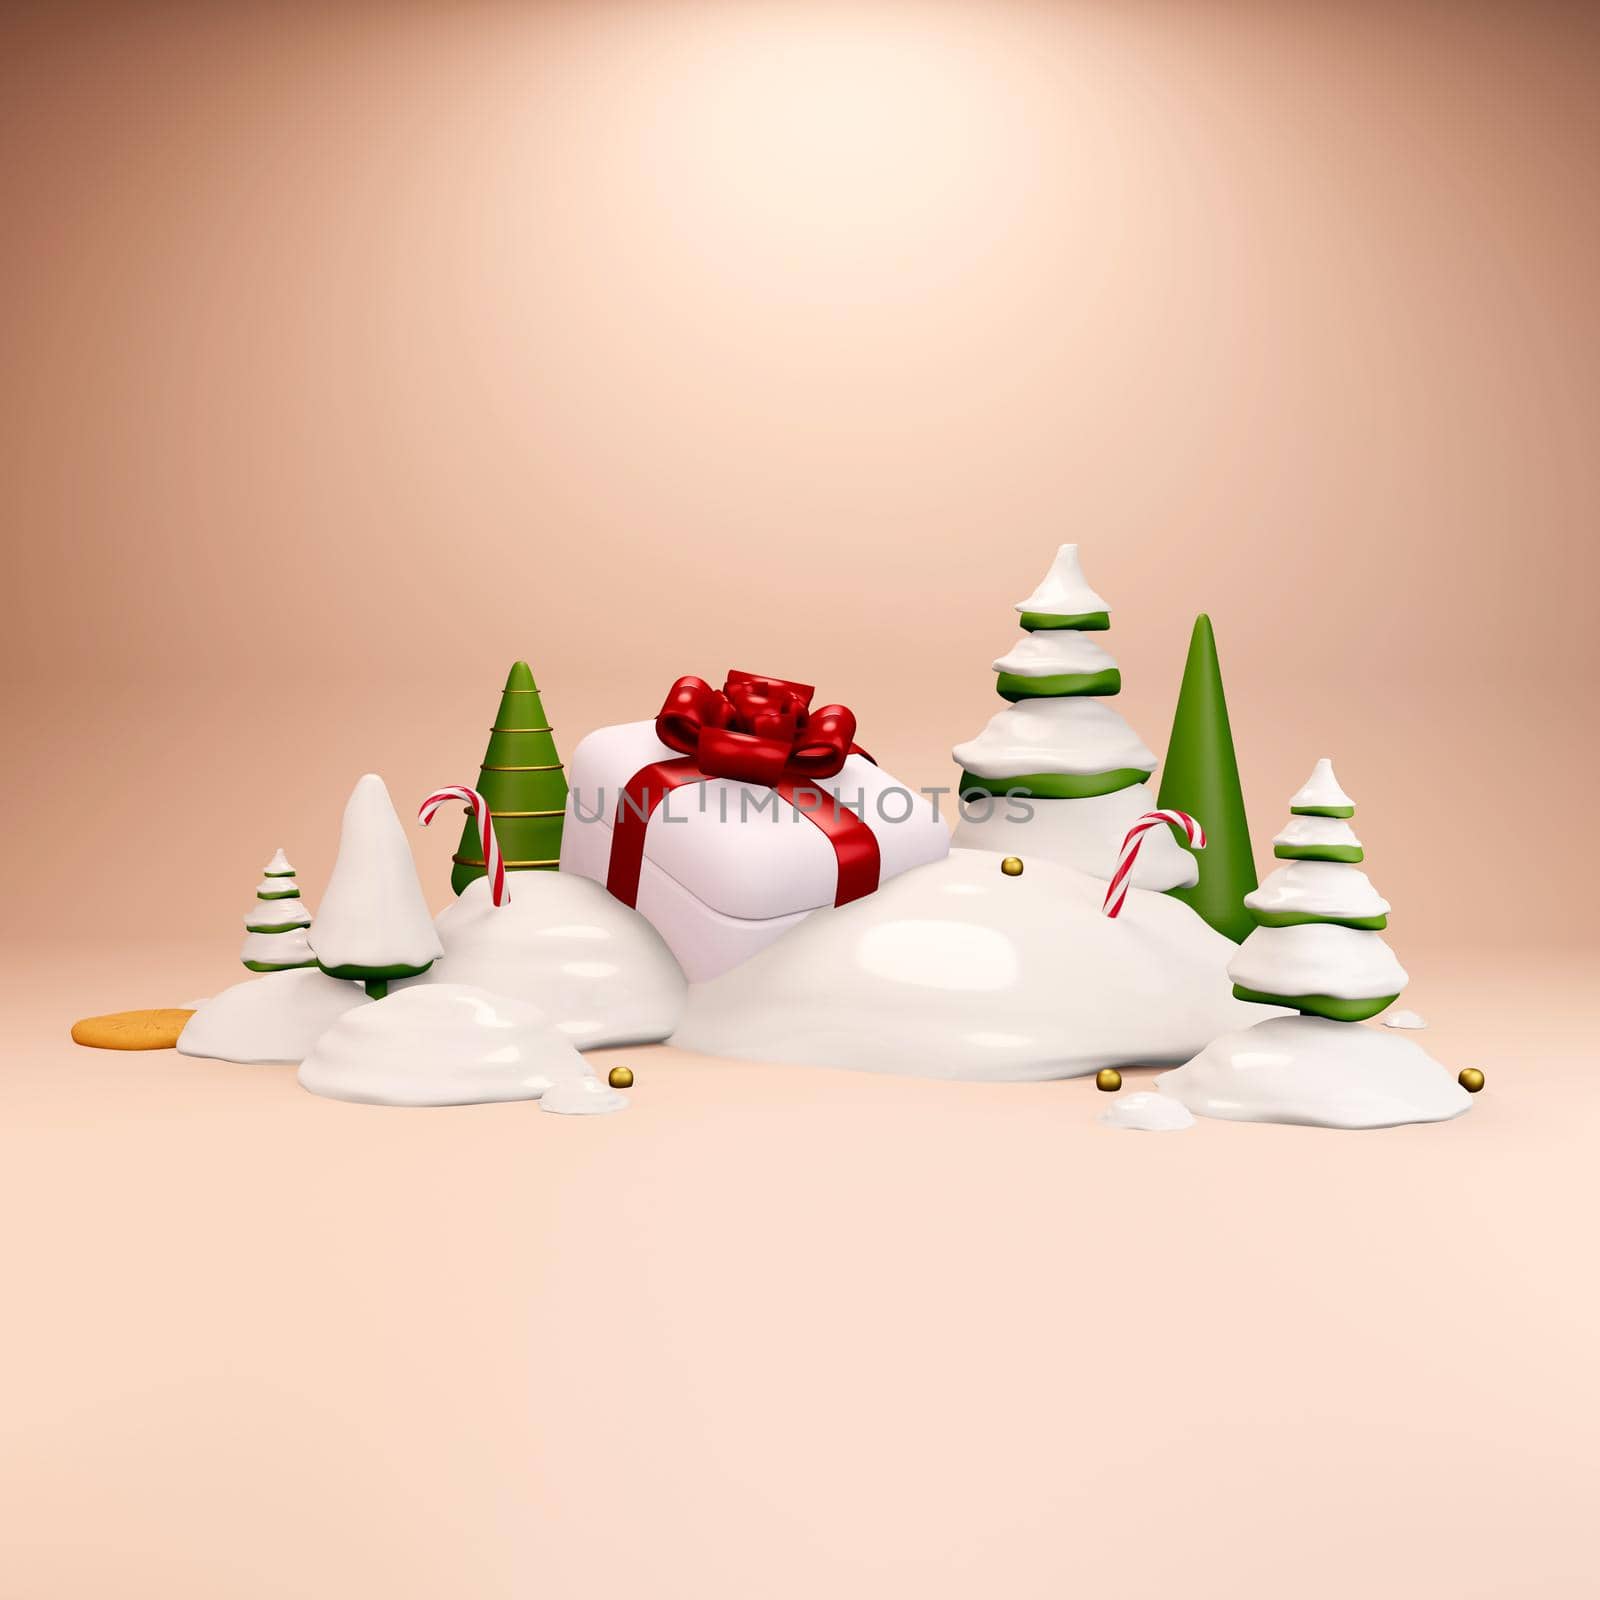 New 2022 Year is coming. Gift in snow on light background. 3d illustration